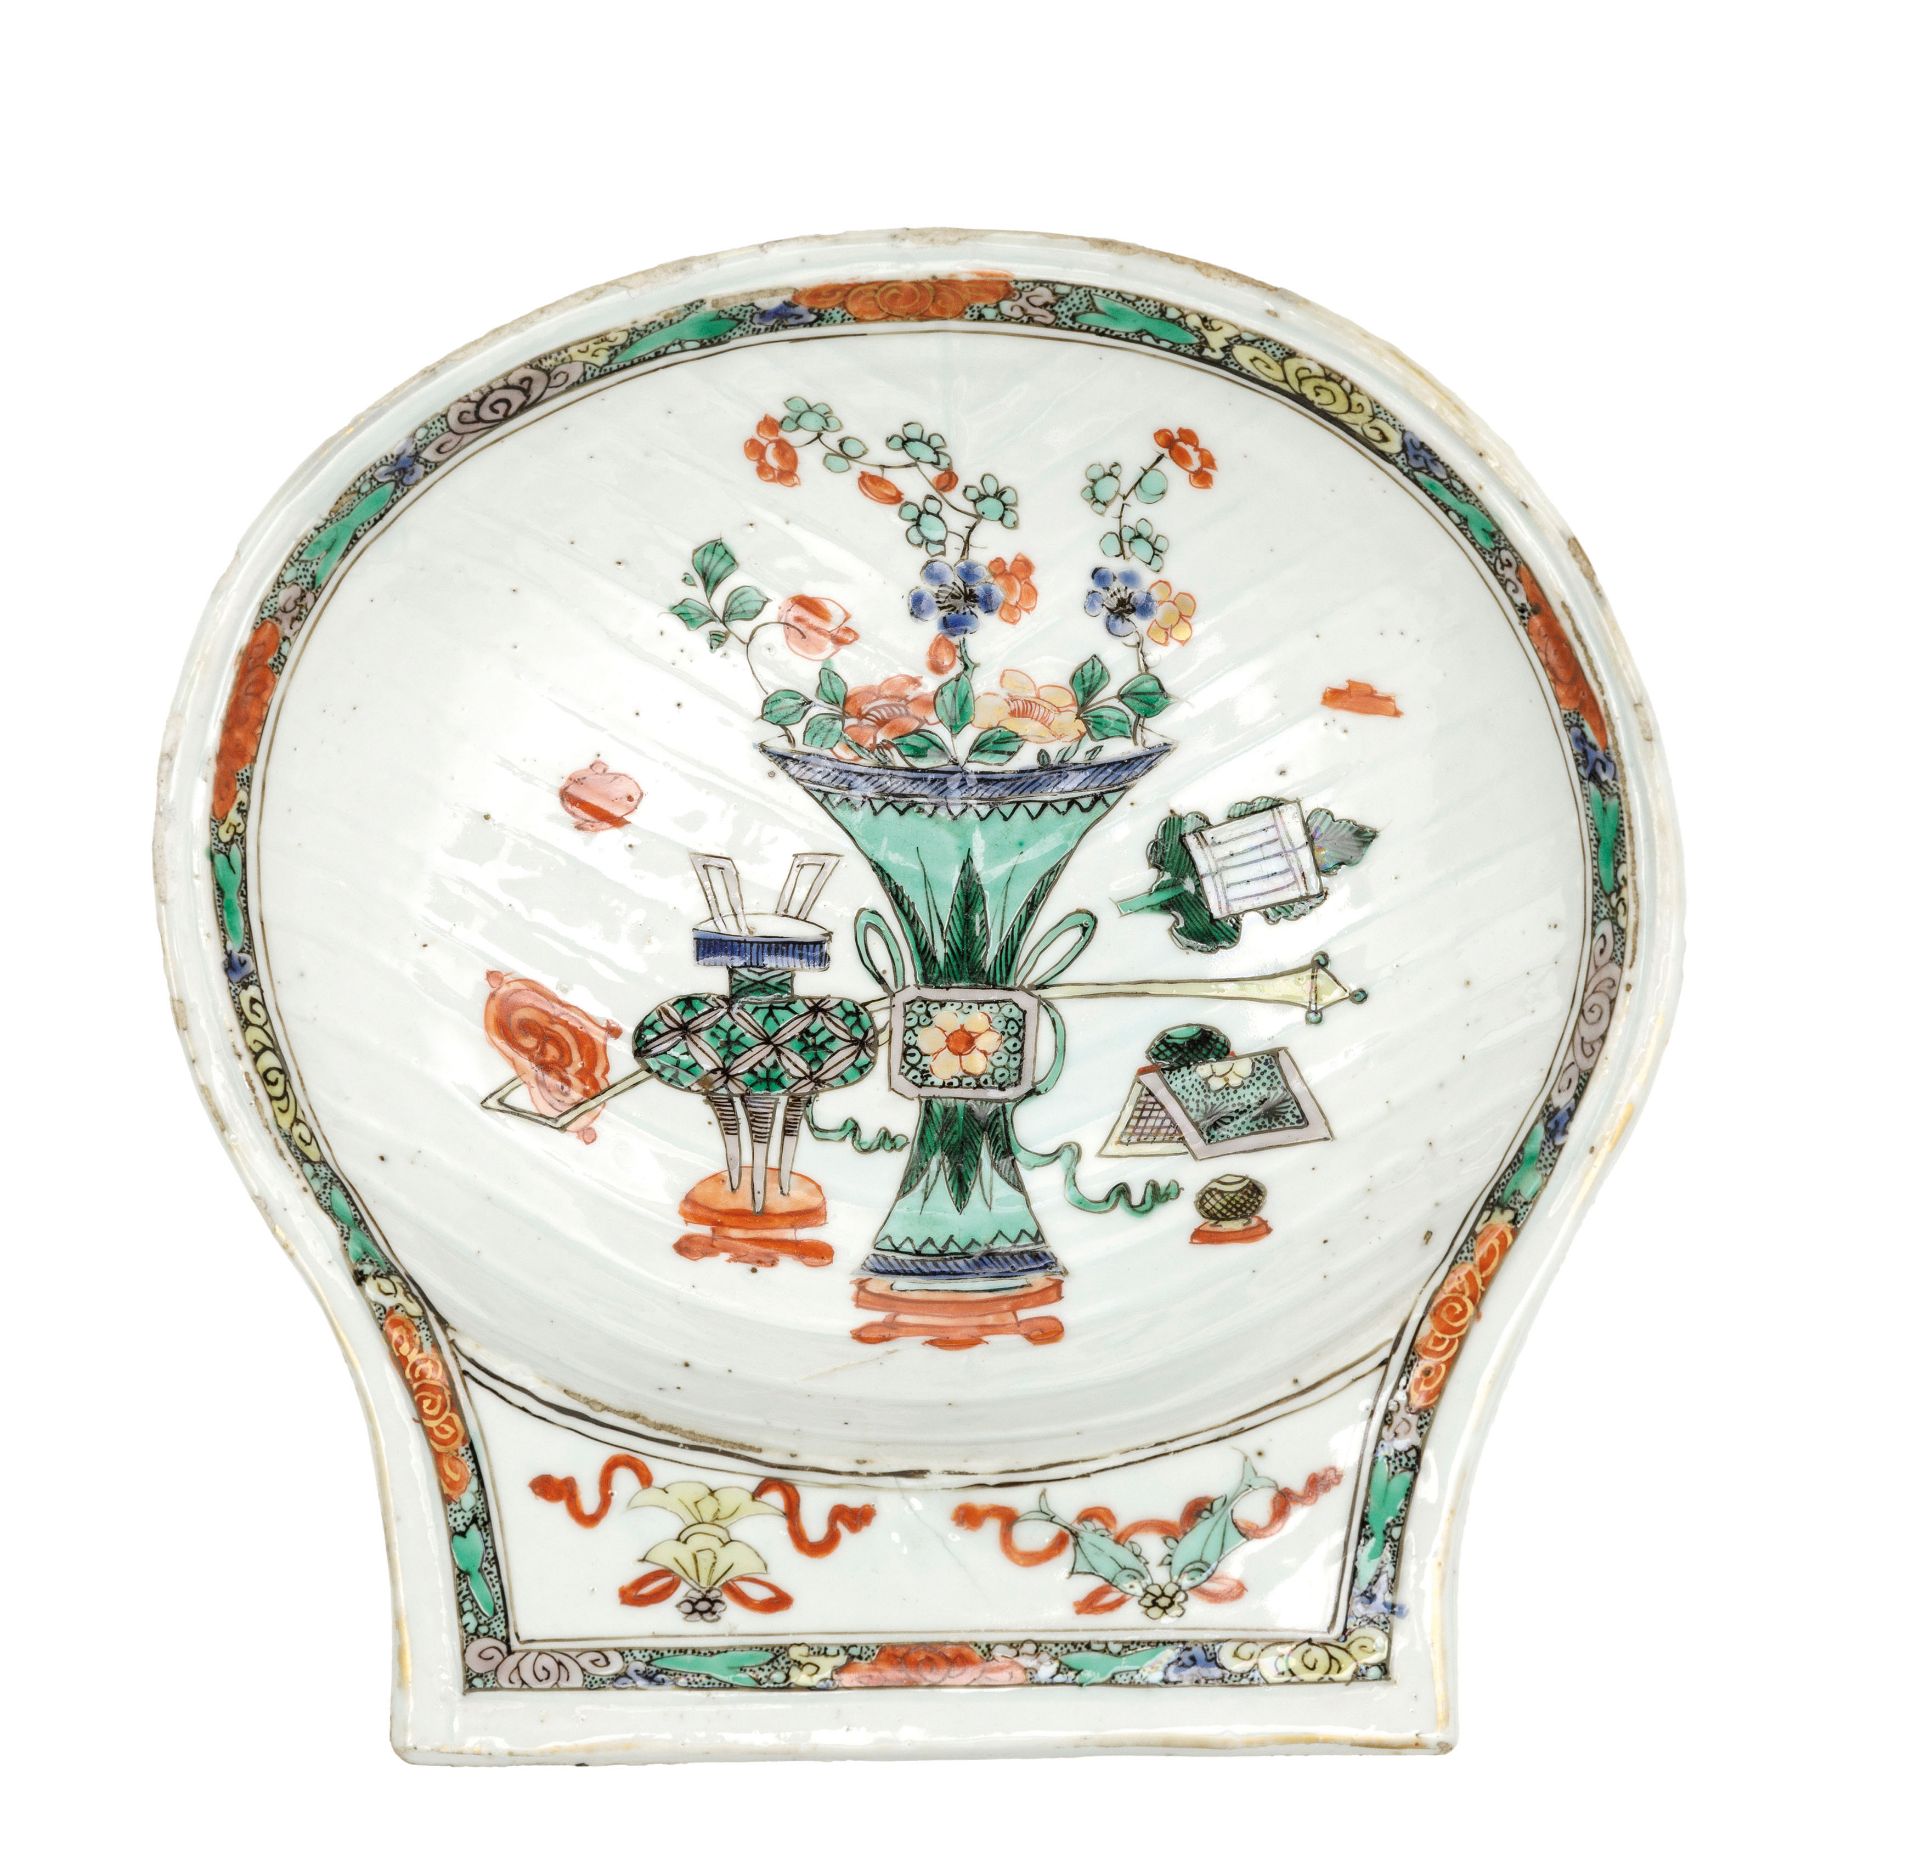 A FAMILLE VERTE PORCELAIN SHELL SHAPE BOWL, CHINA, EARLY 18TH CENTURY, KANGXI PERIOD (1662-1722)